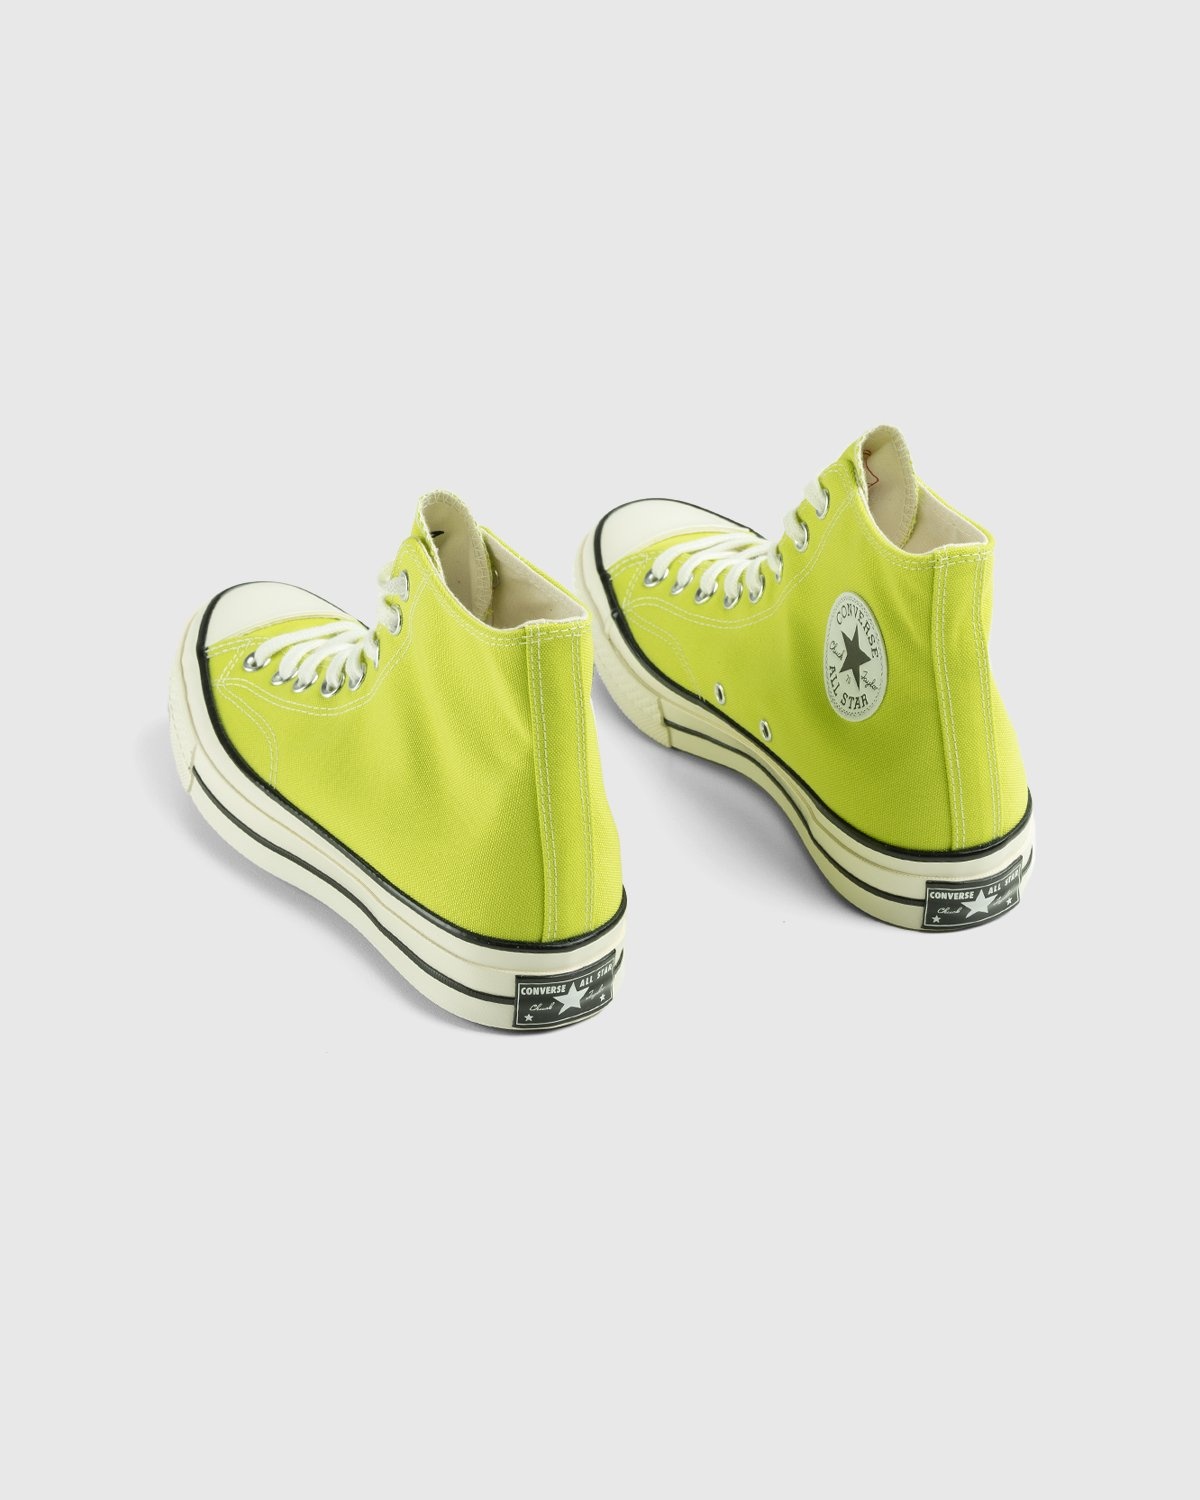 Converse – Chuck 70 Lime Twist Egret Black - Sneakers - Yellow - Image 4